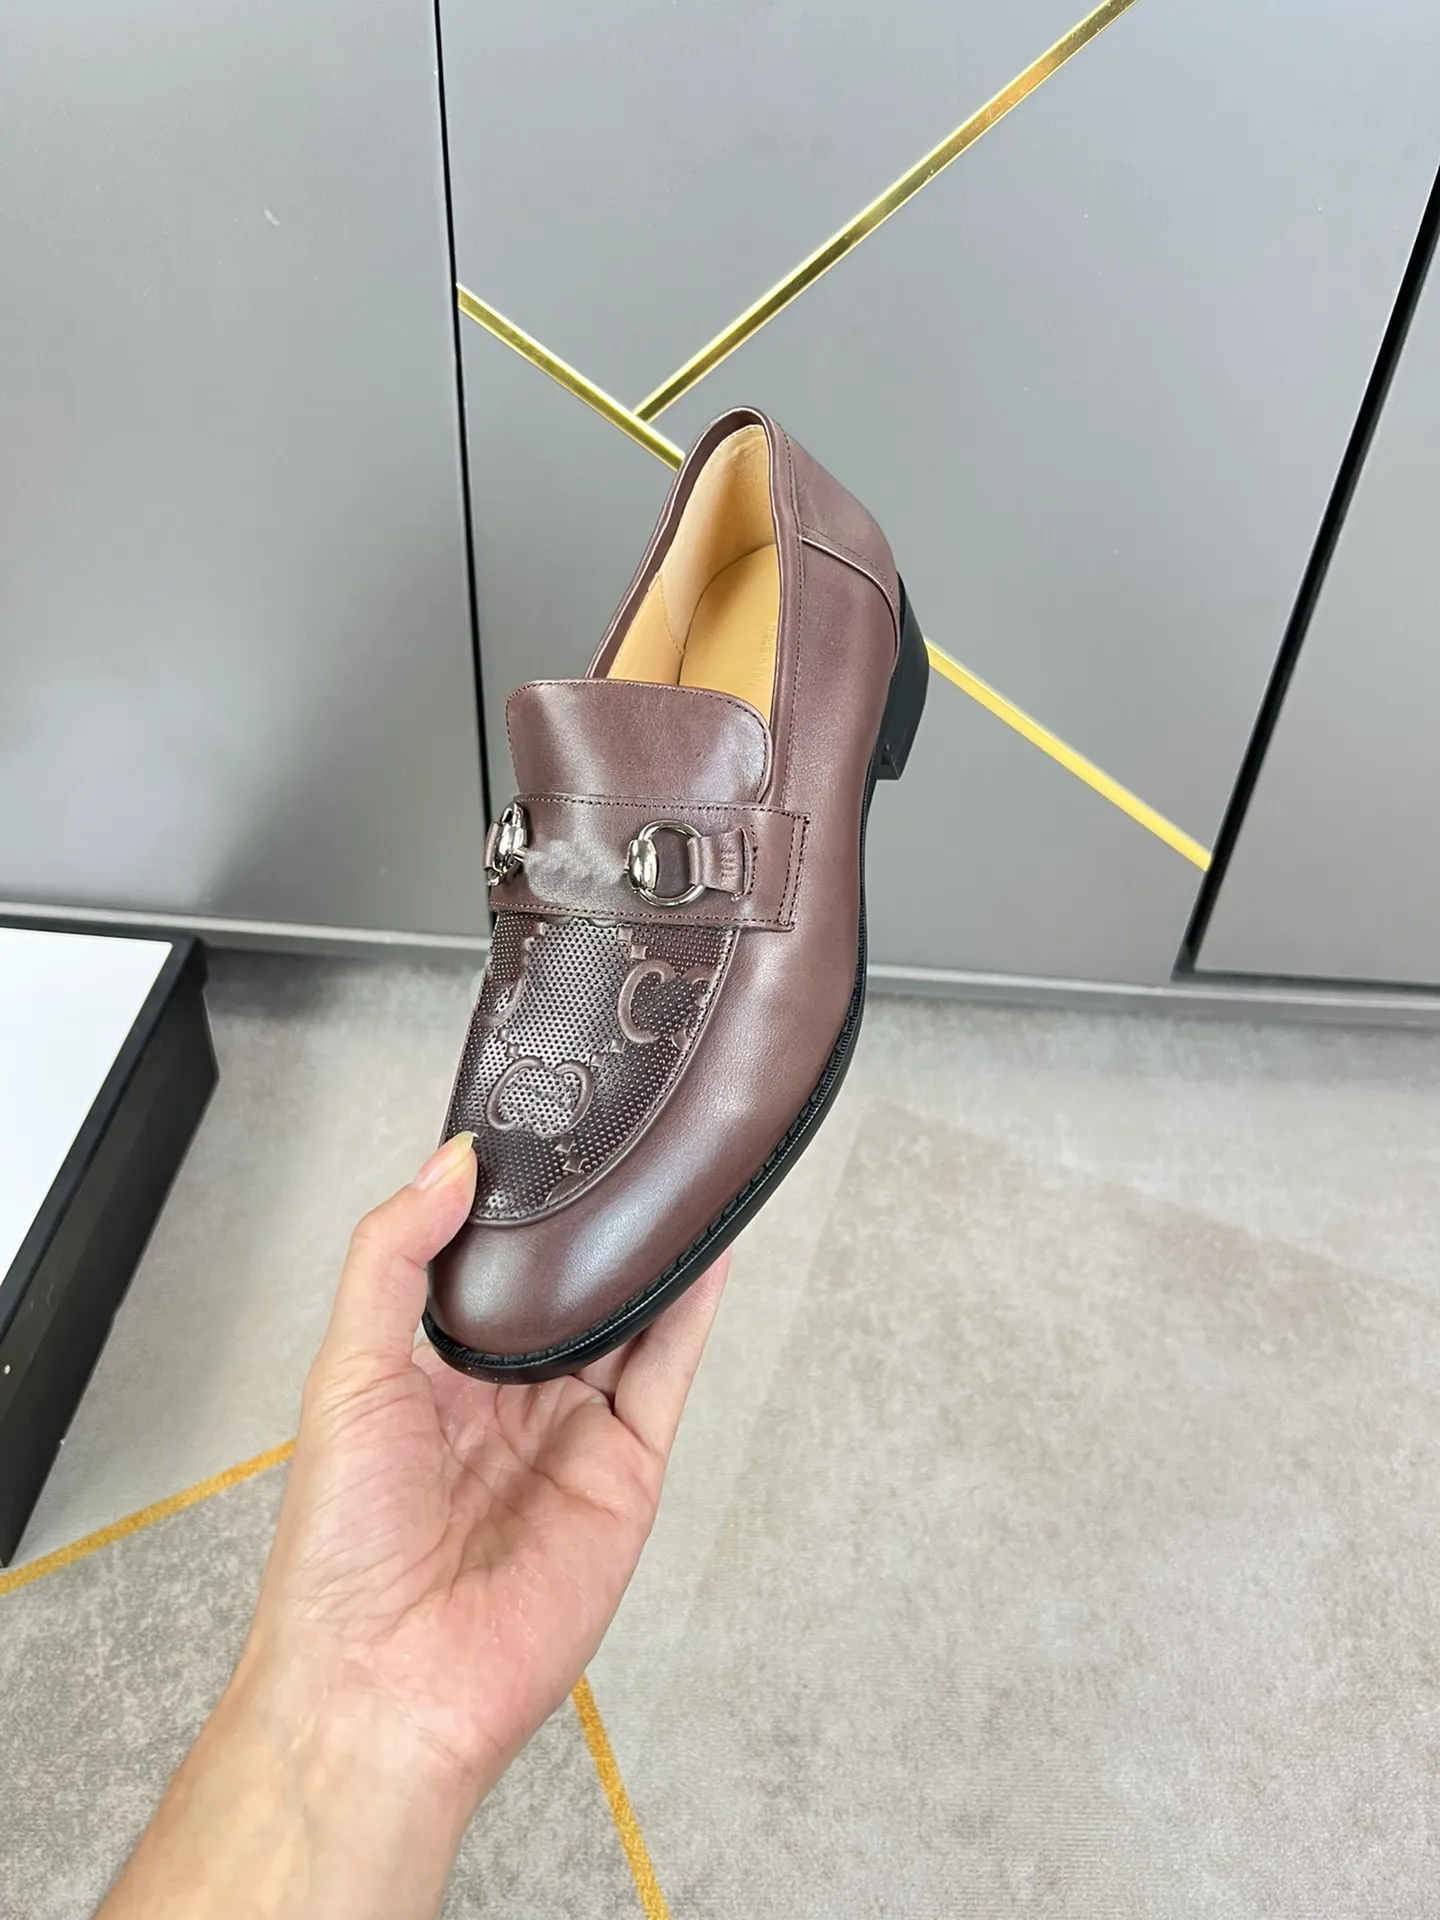 brand loafers designer autumn celebrity with bee leather shoes loafer platform platform Men shoes dress shoe luxury high quality genuine leather boots With Box